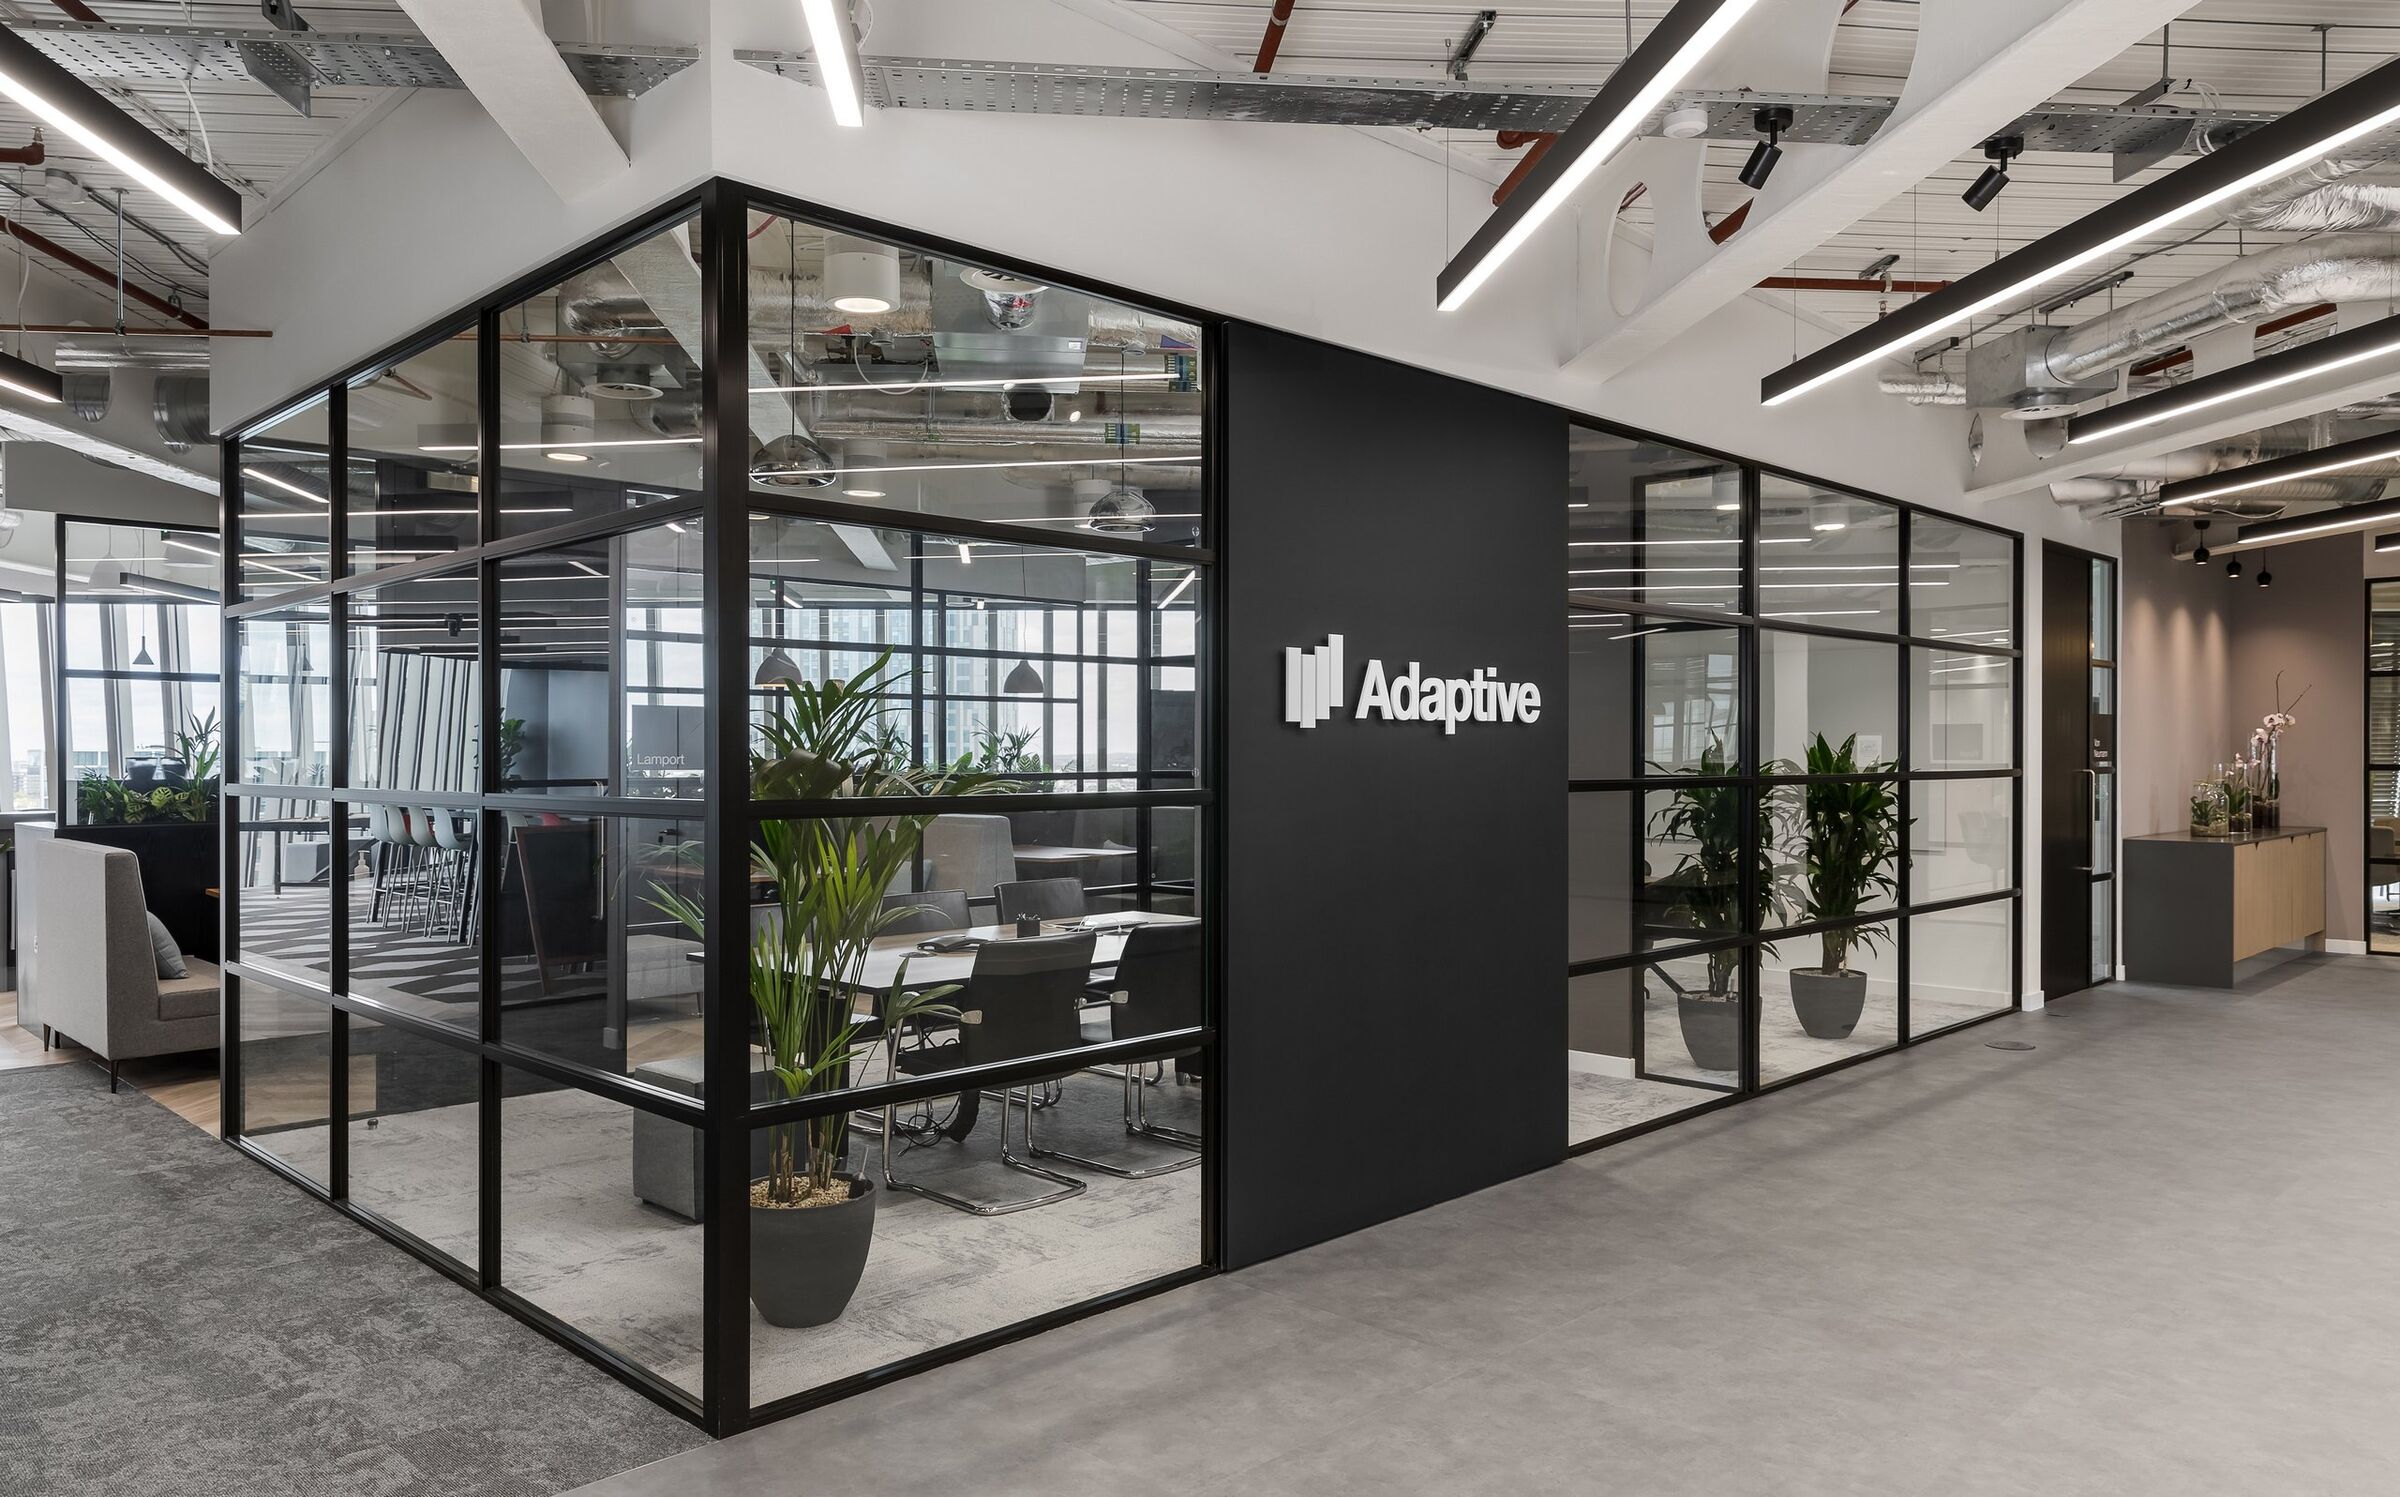 Adaptive is helping KCx build its new execution equities platform